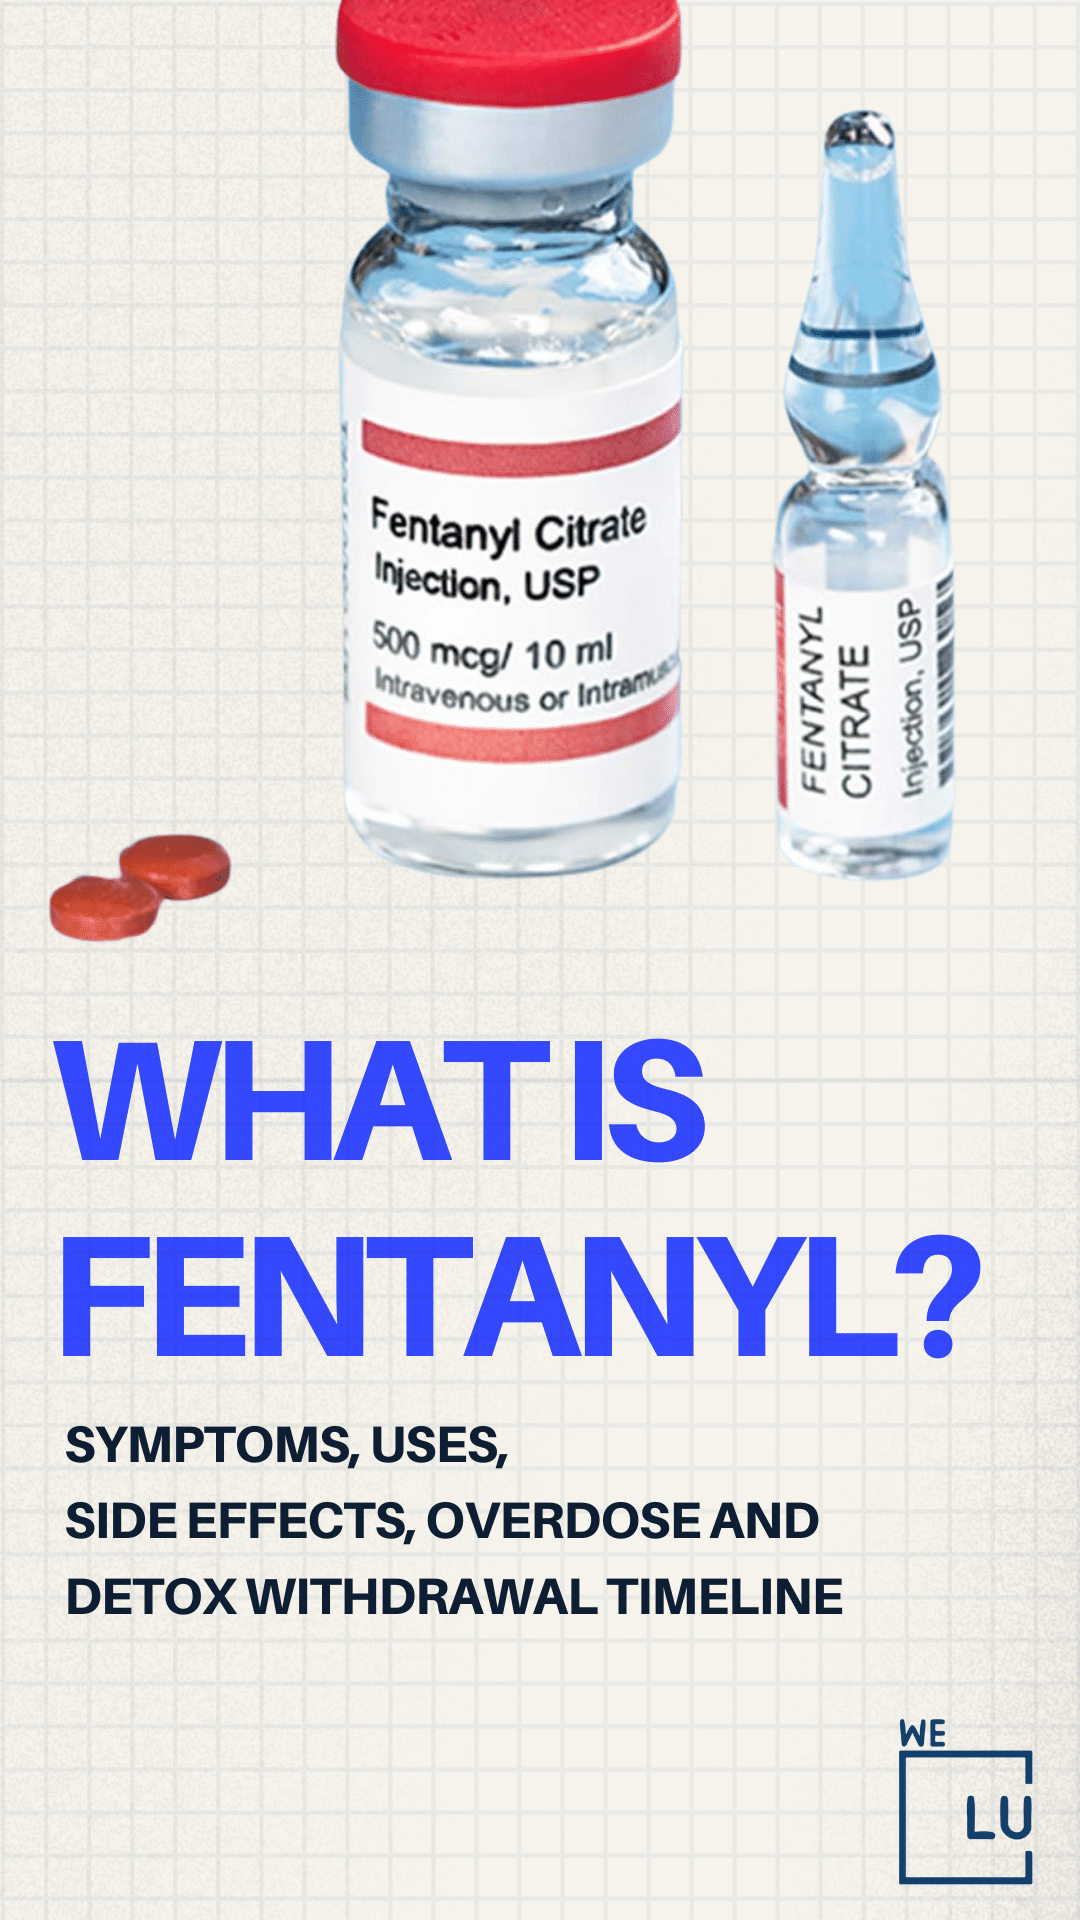 Carfentanil and fentanyl-related deaths have been reported in multiple countries, including the United States, Canada, and some parts of Europe.